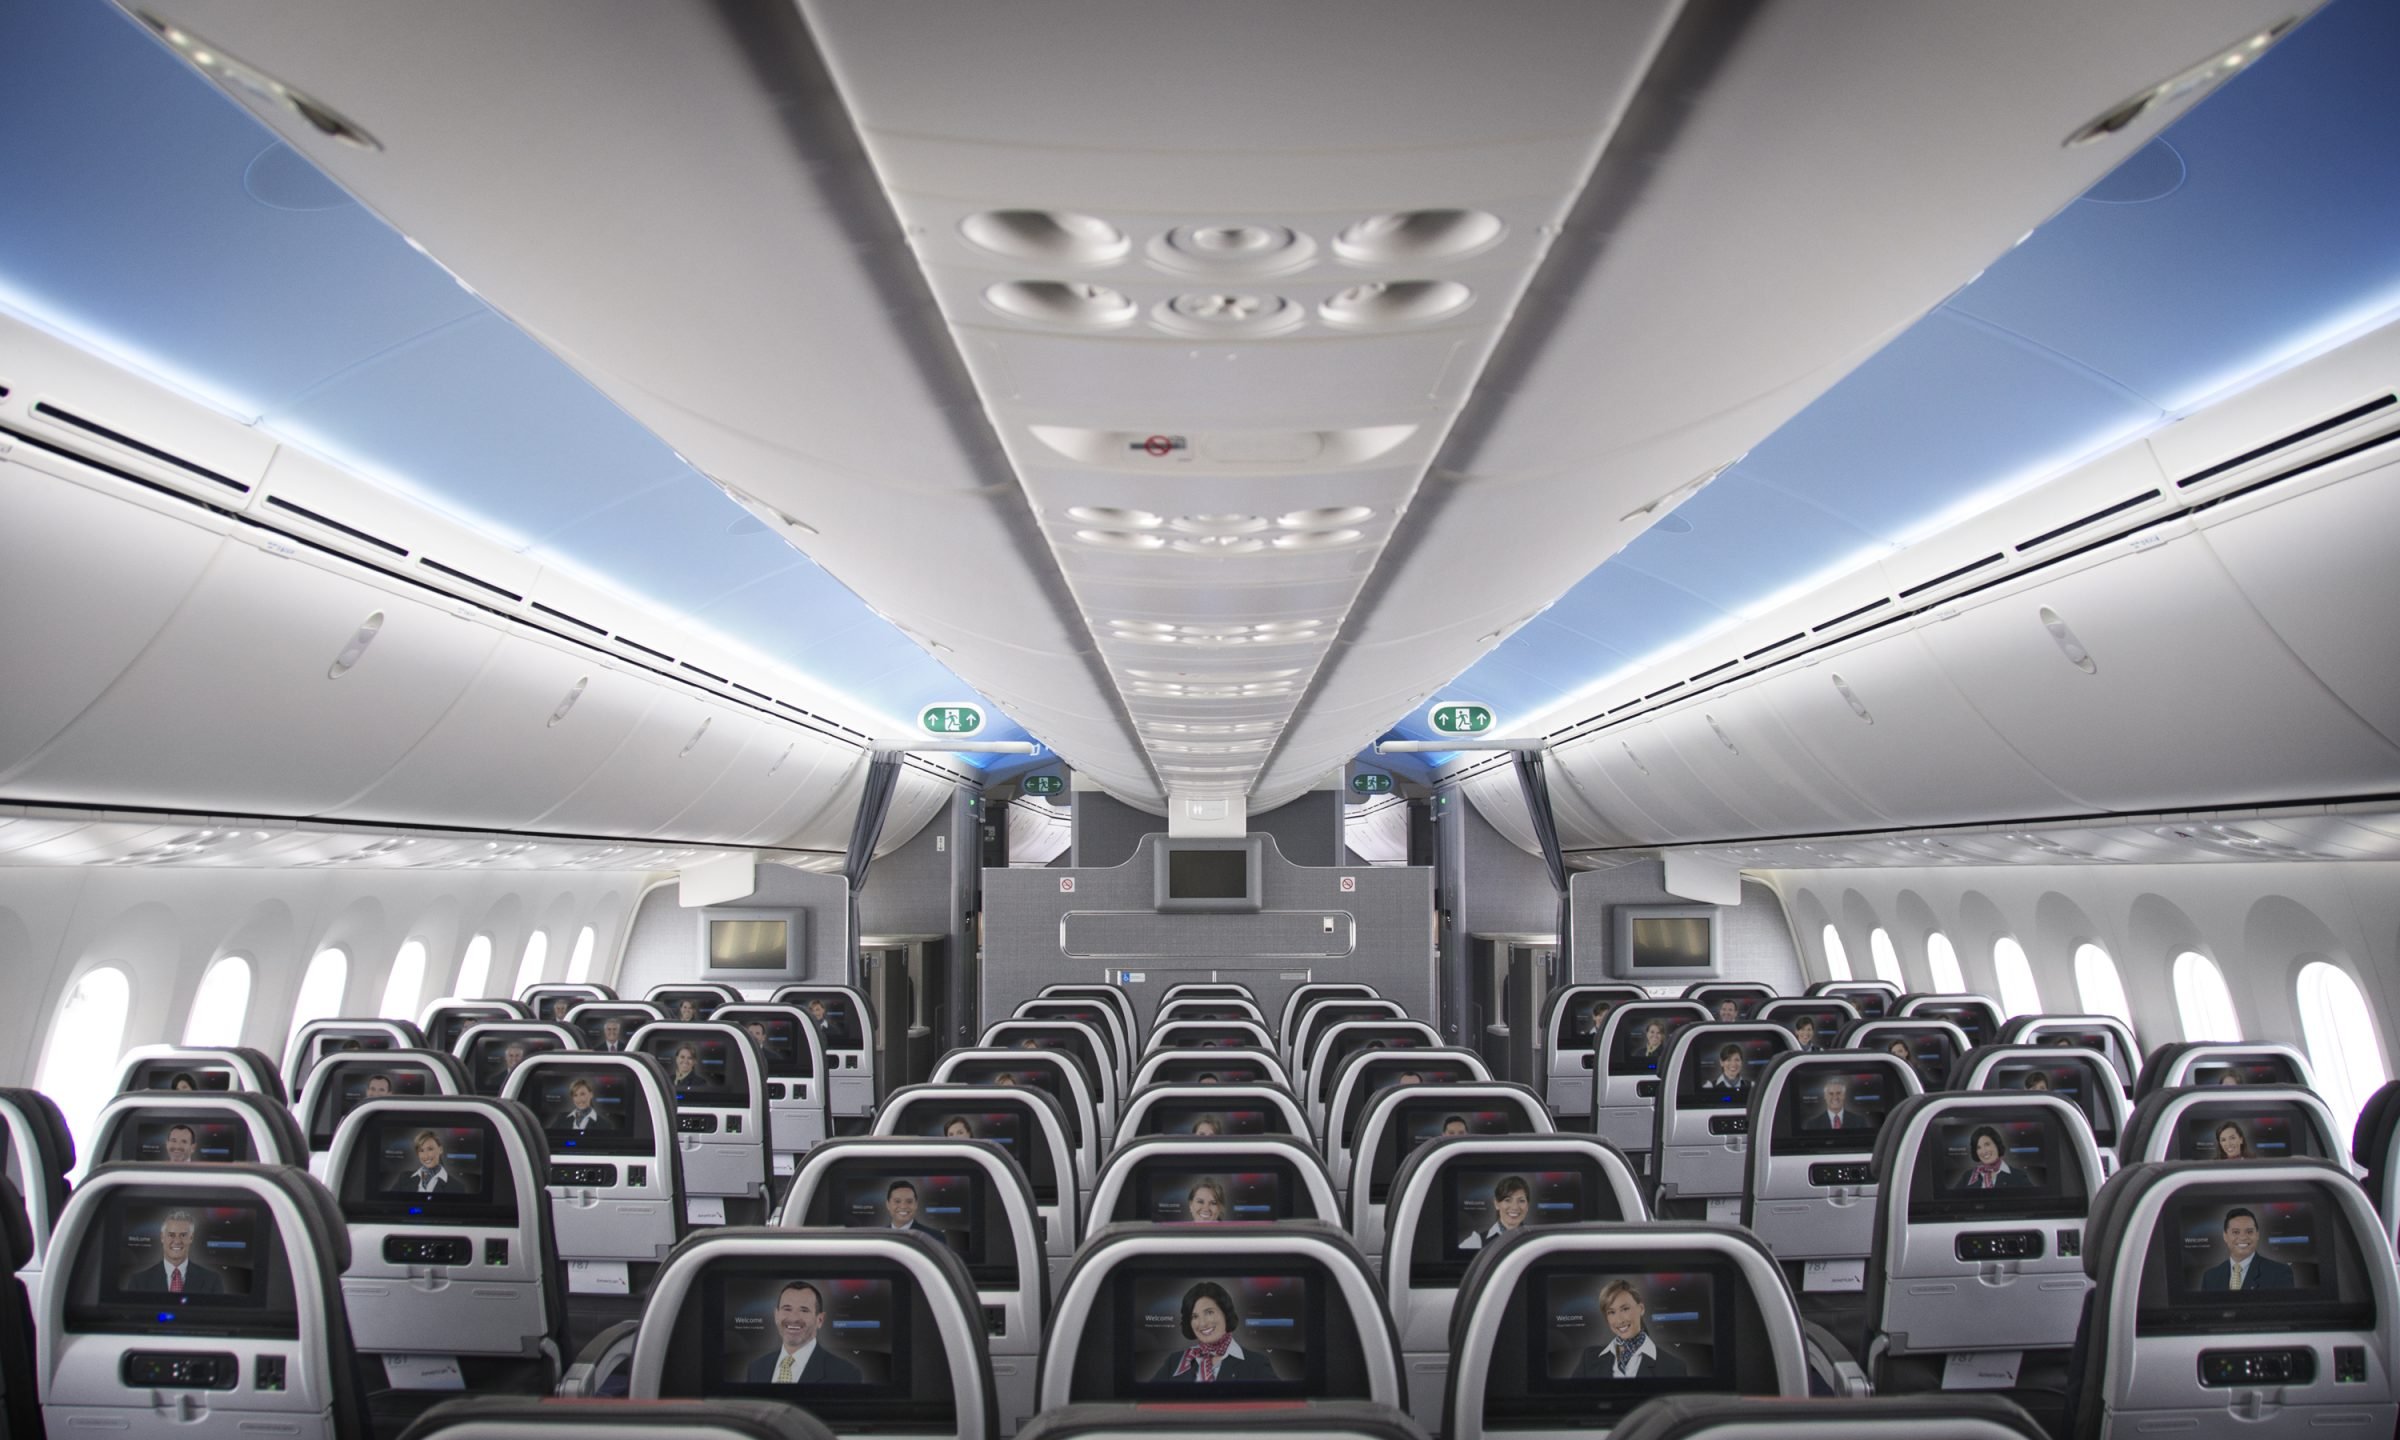 American Airlines Main Cabin: What to Know - NerdWallet